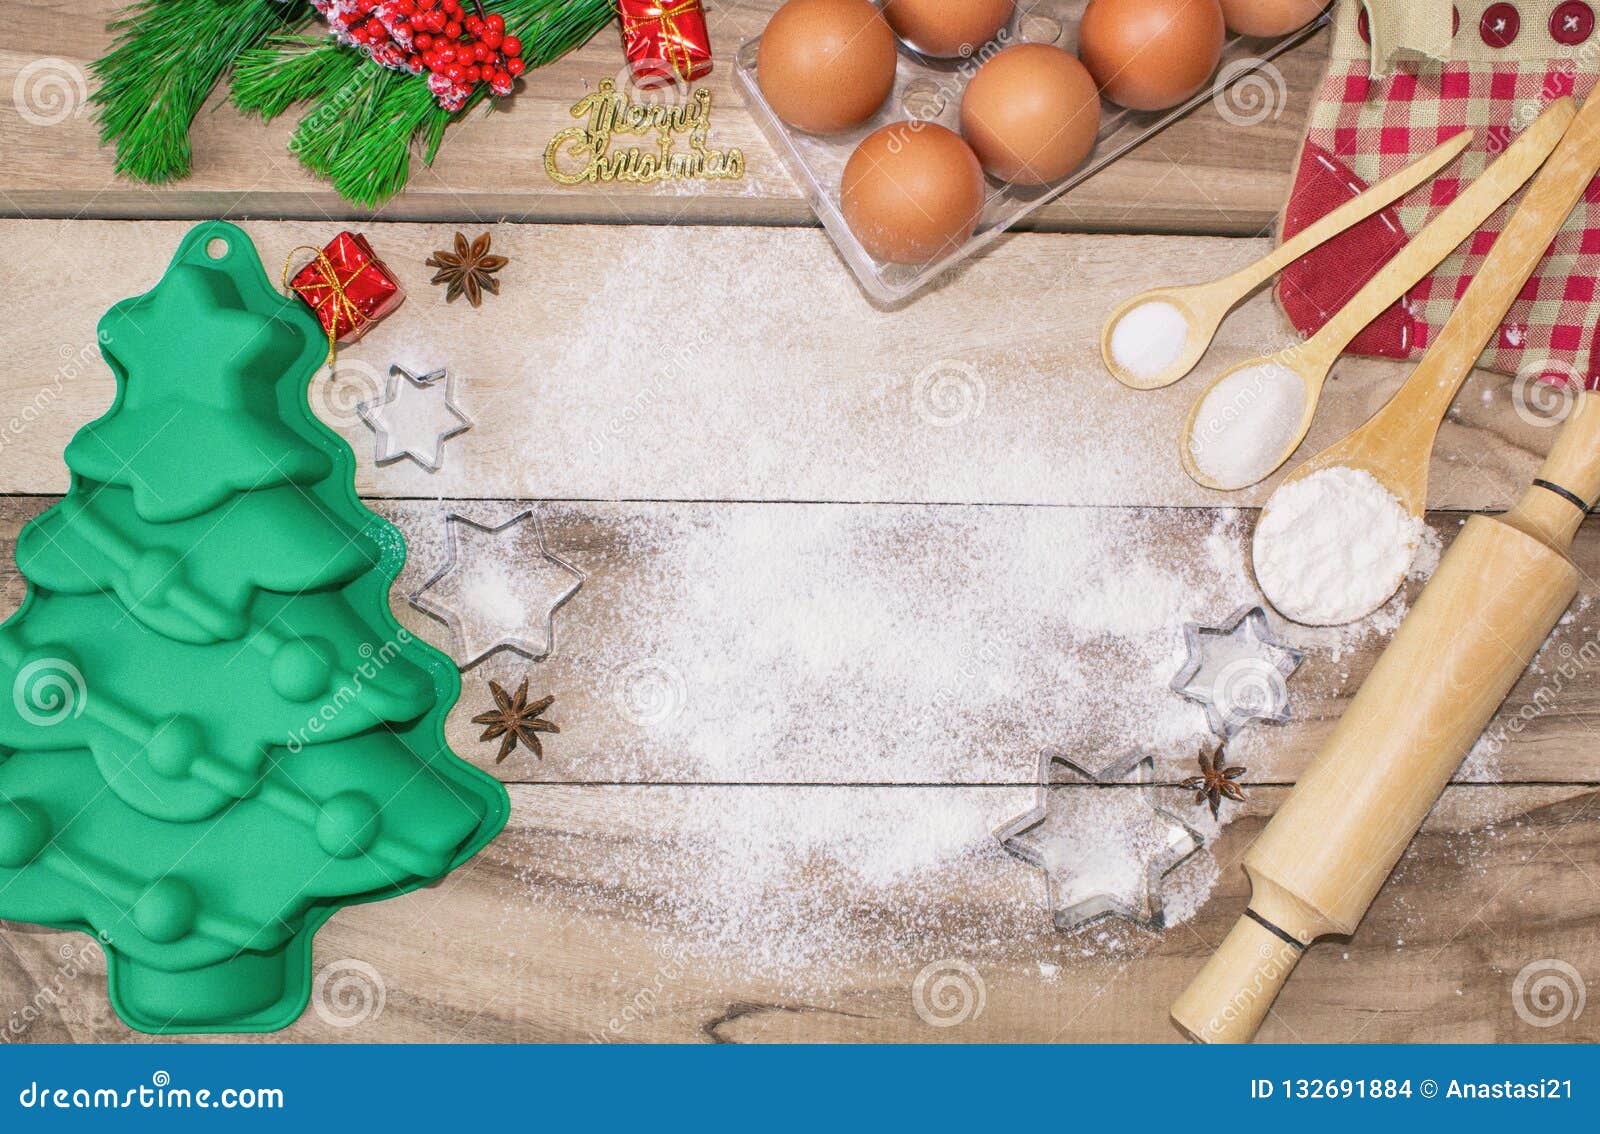 https://thumbs.dreamstime.com/z/christmas-baking-cake-background-ingredients-tools-baking-flour-eggs-silicone-molds-shape-christmas-tree-132691884.jpg